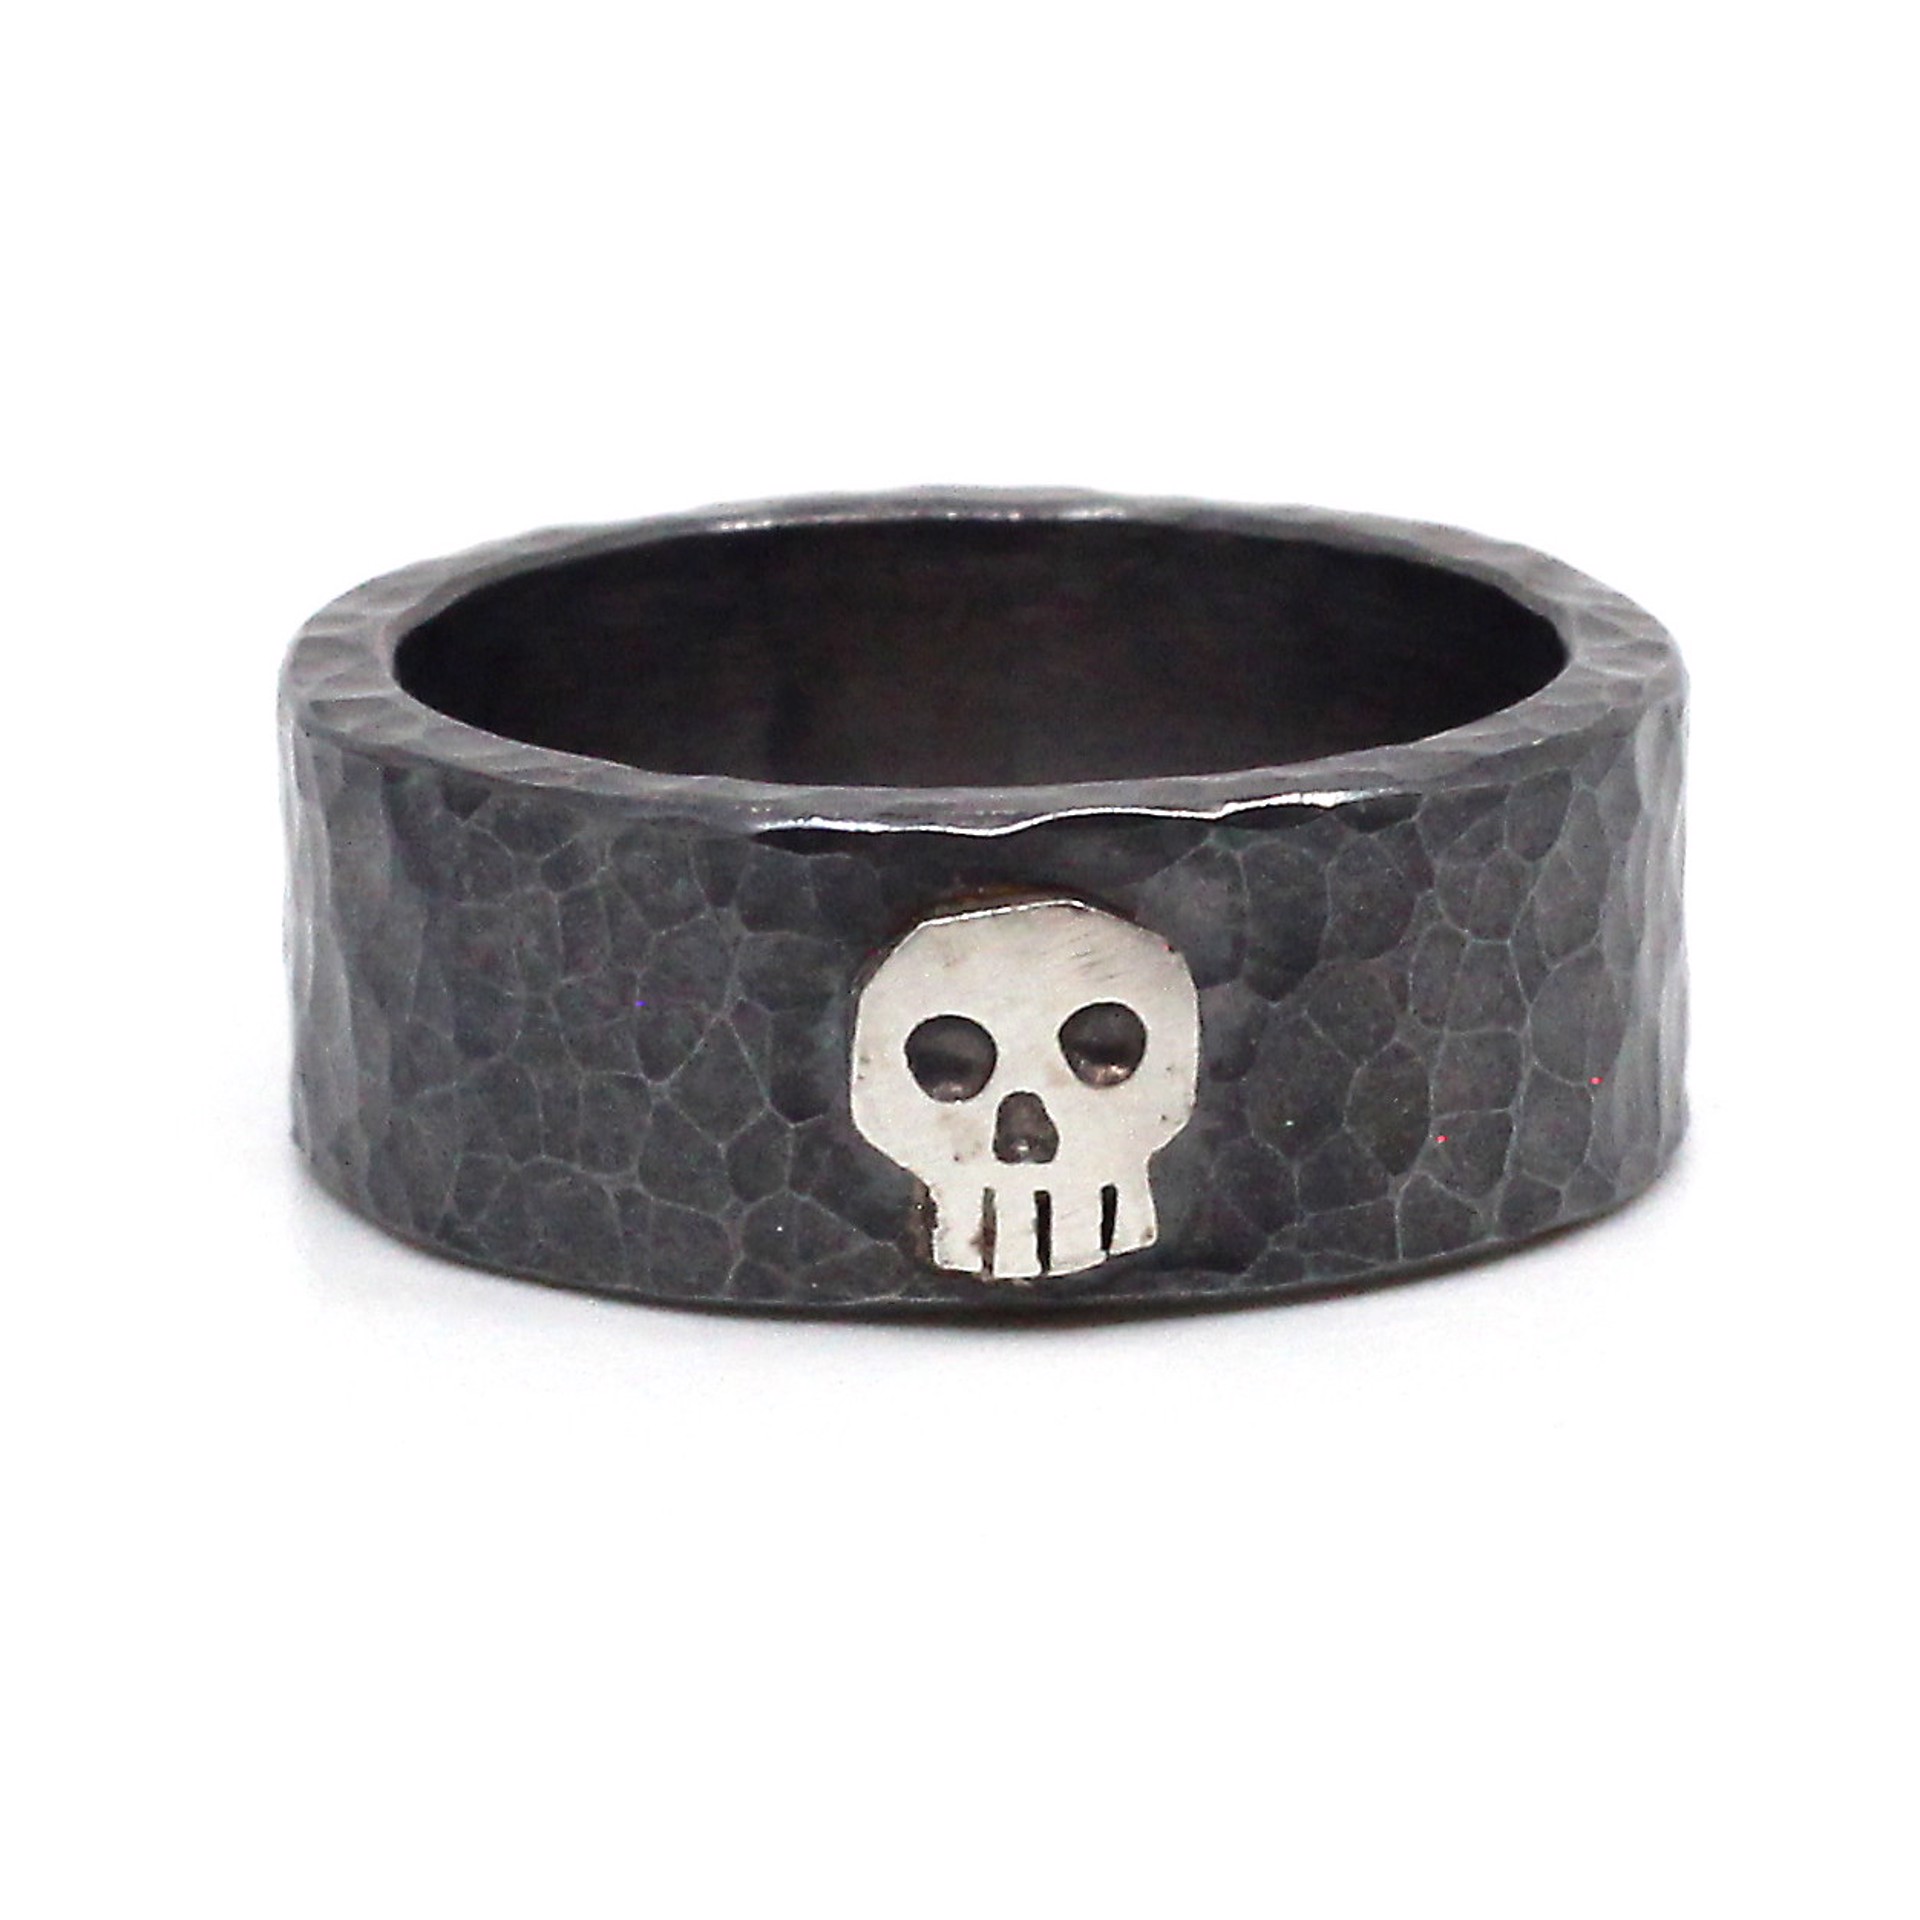 Single Skull Ring (Size 8) by Susan Elnora